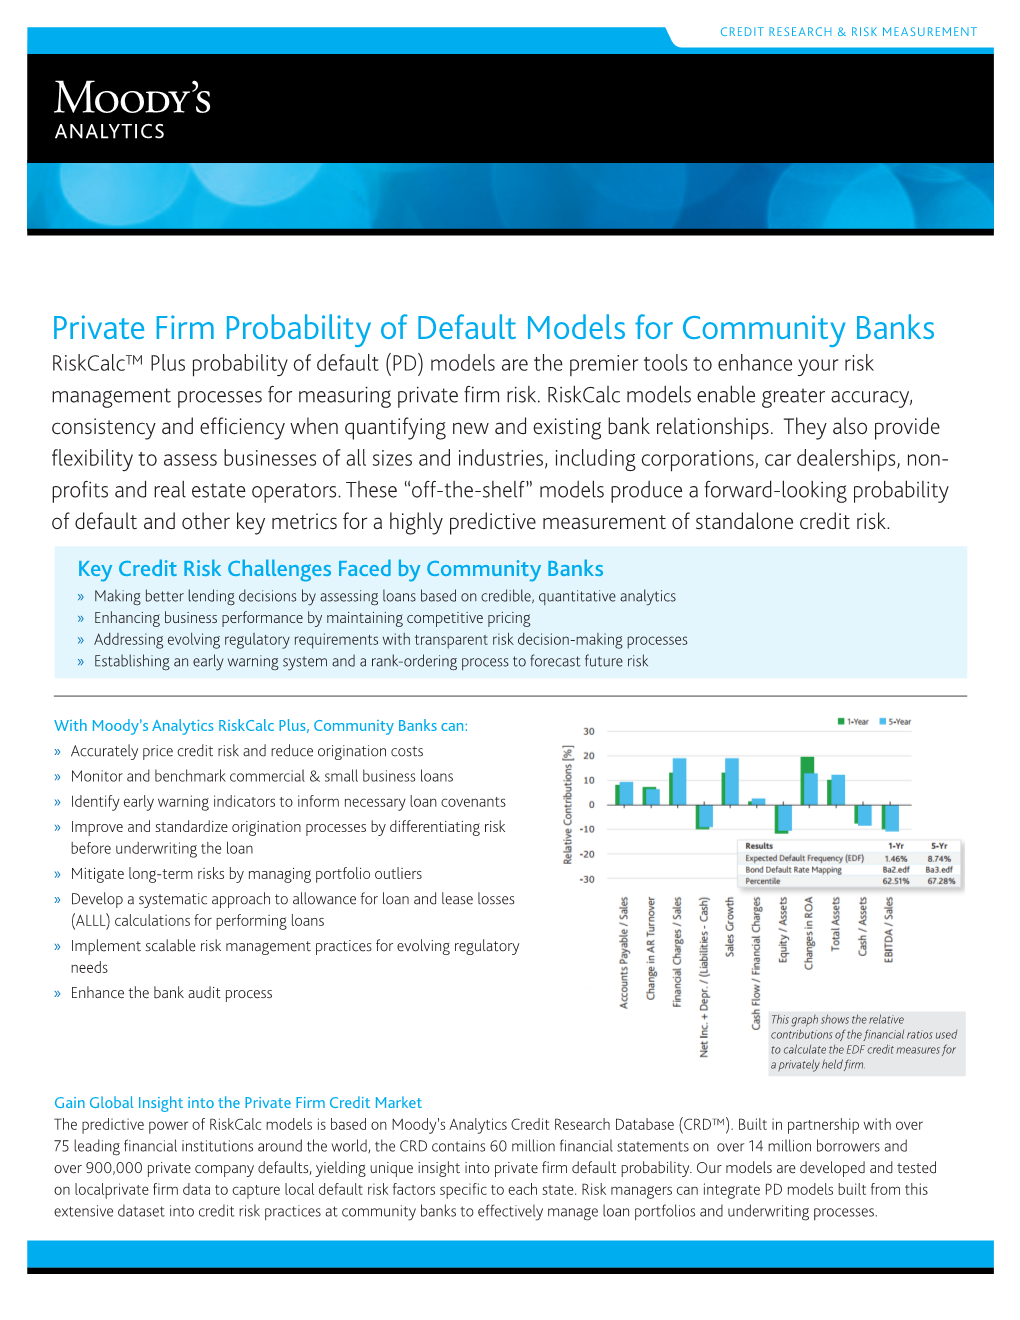 Private Firm Probability of Default Models for Community Banks